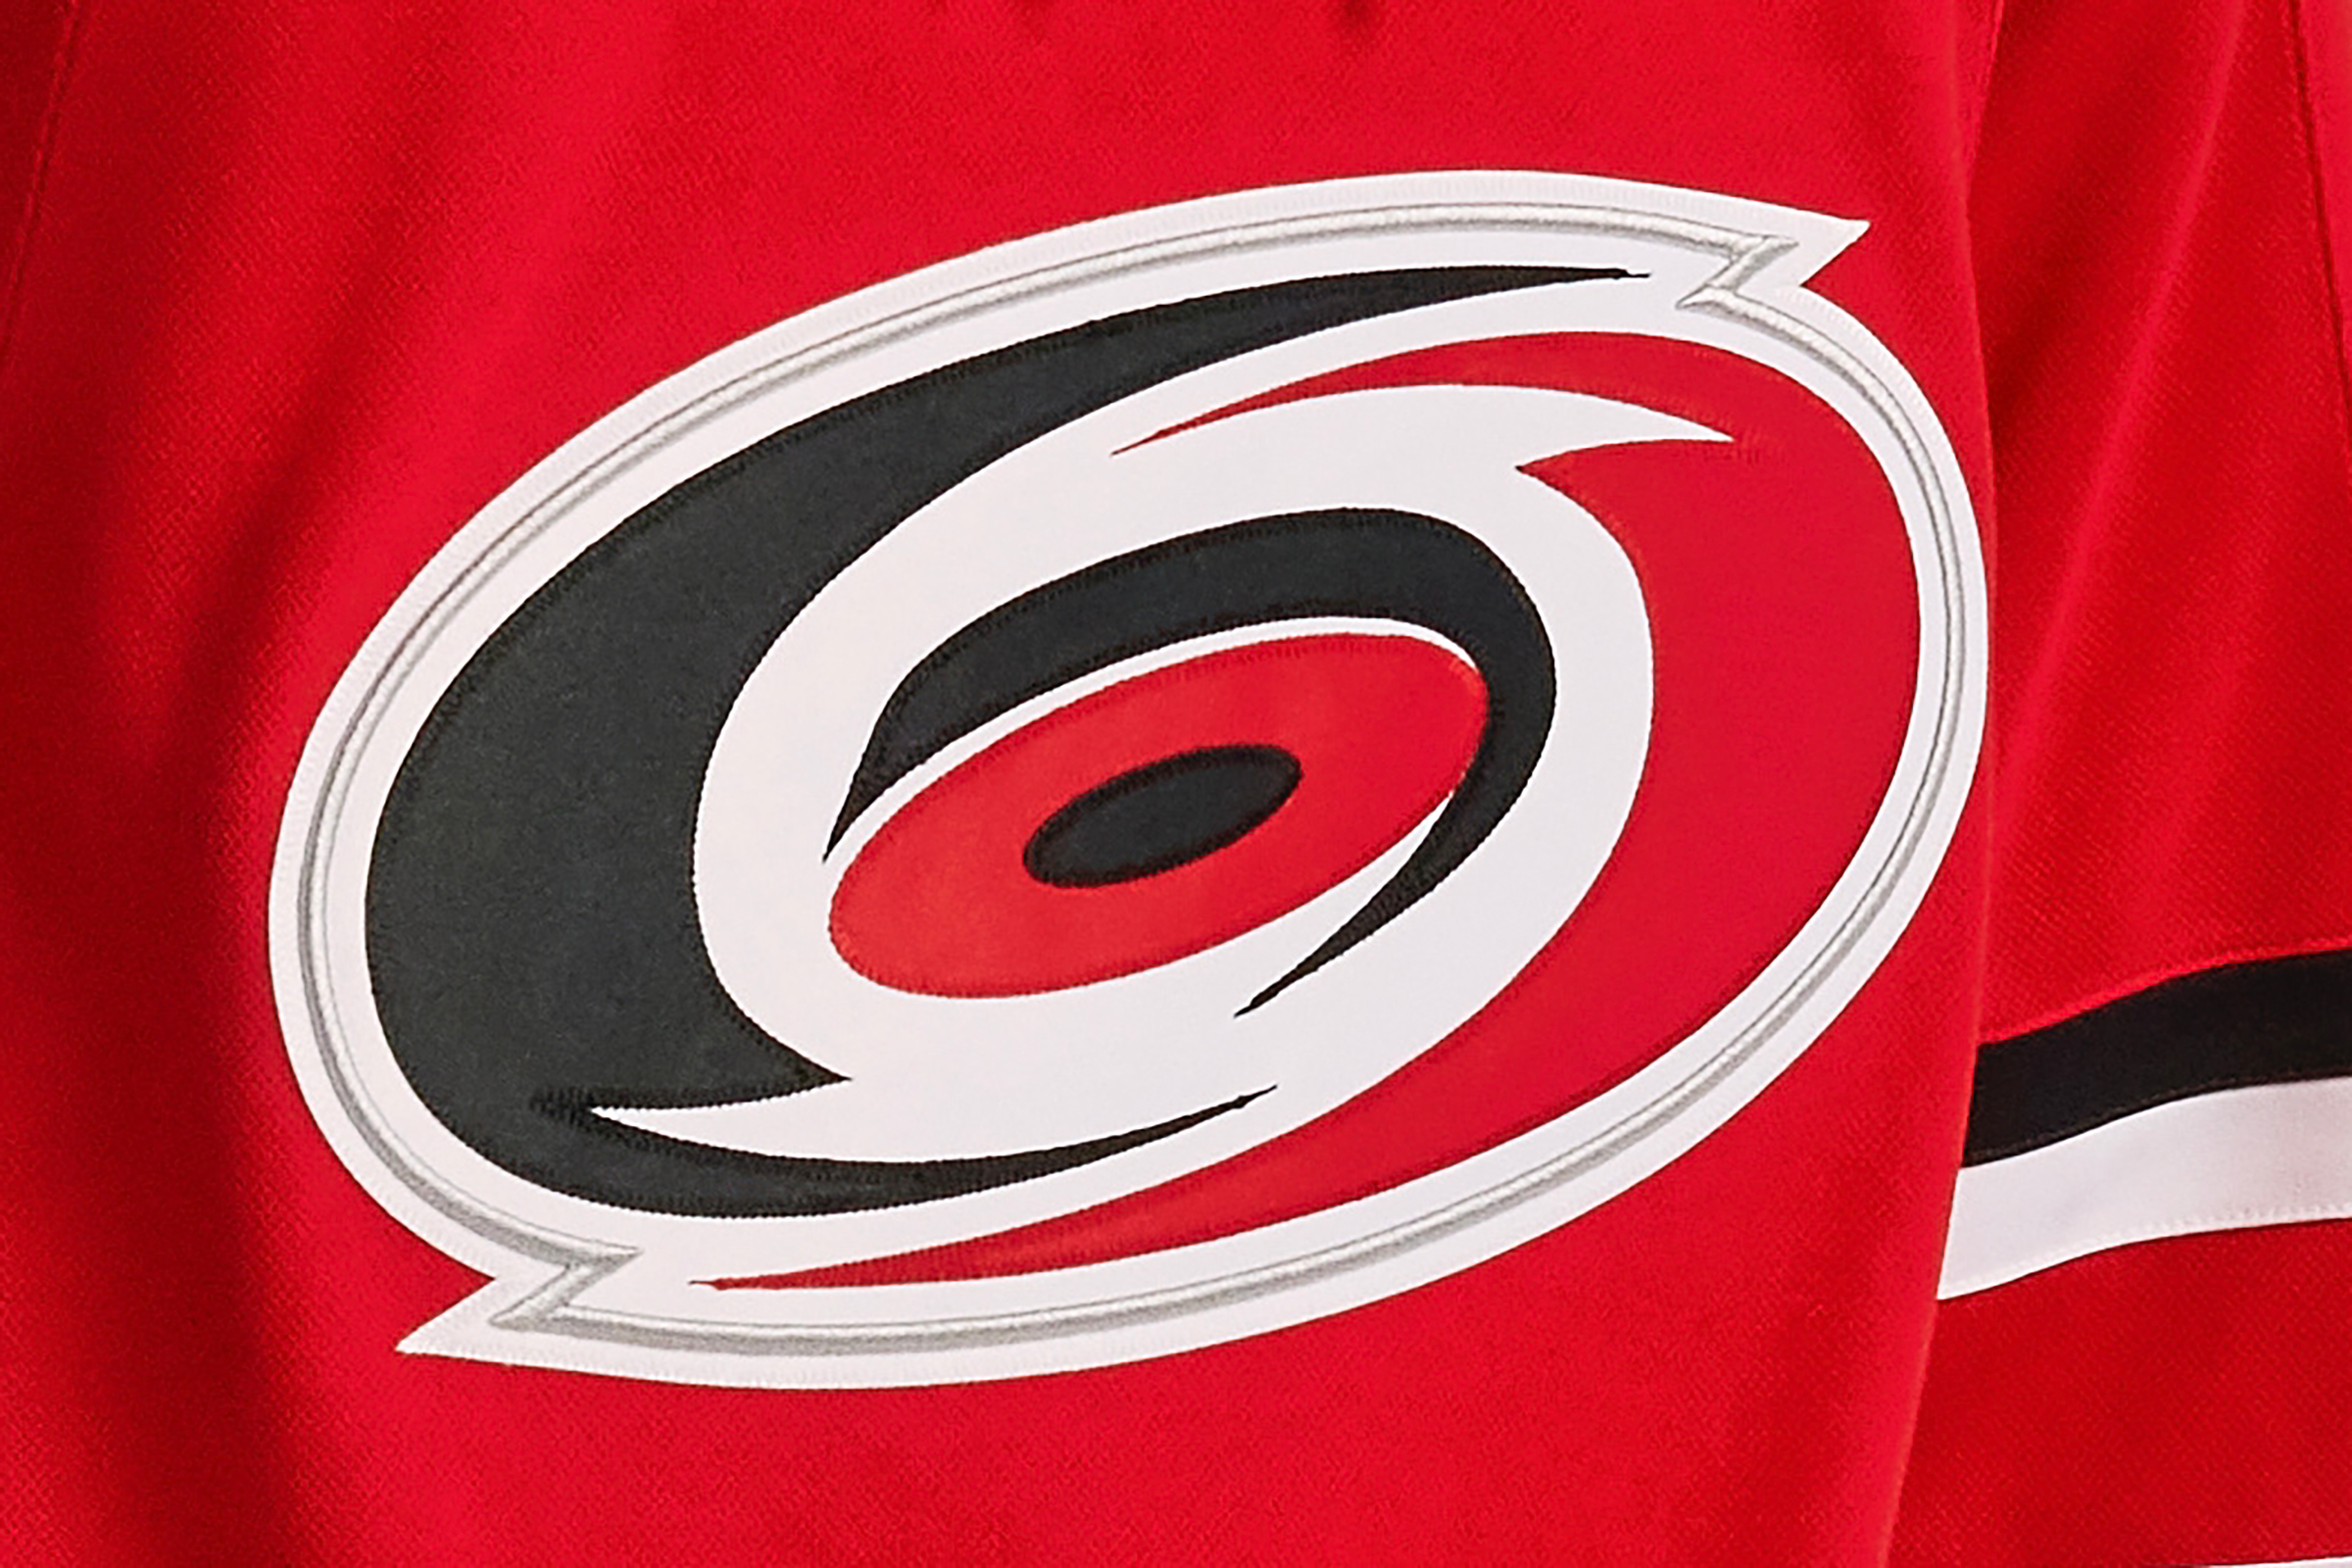 The Hurricanes' home jersey crest.